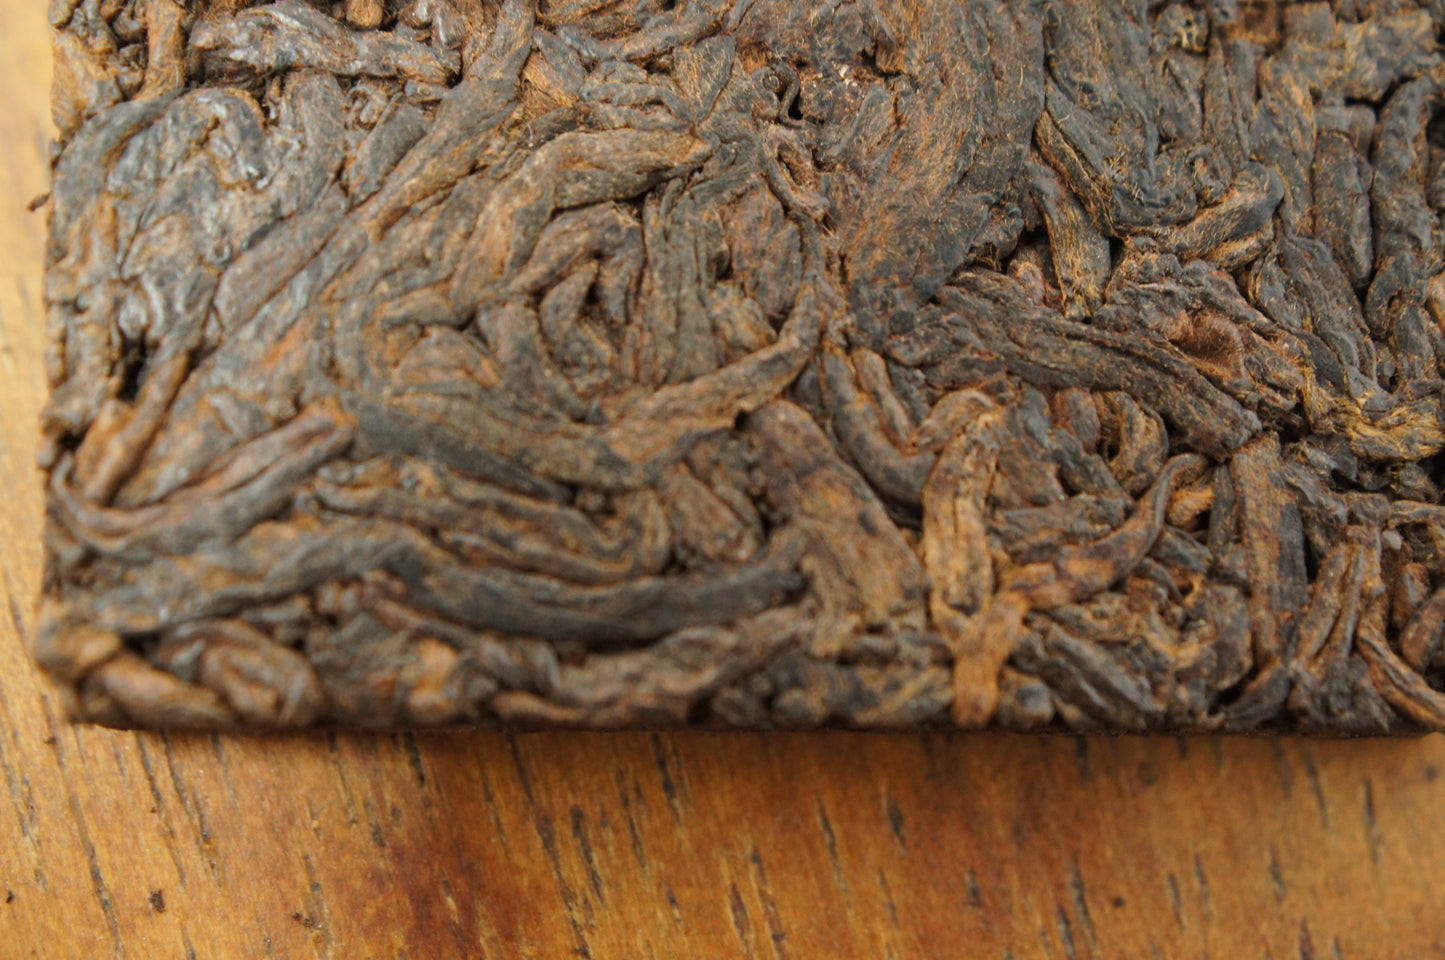 Earth Bound and Down Meng Song Shu Puerh